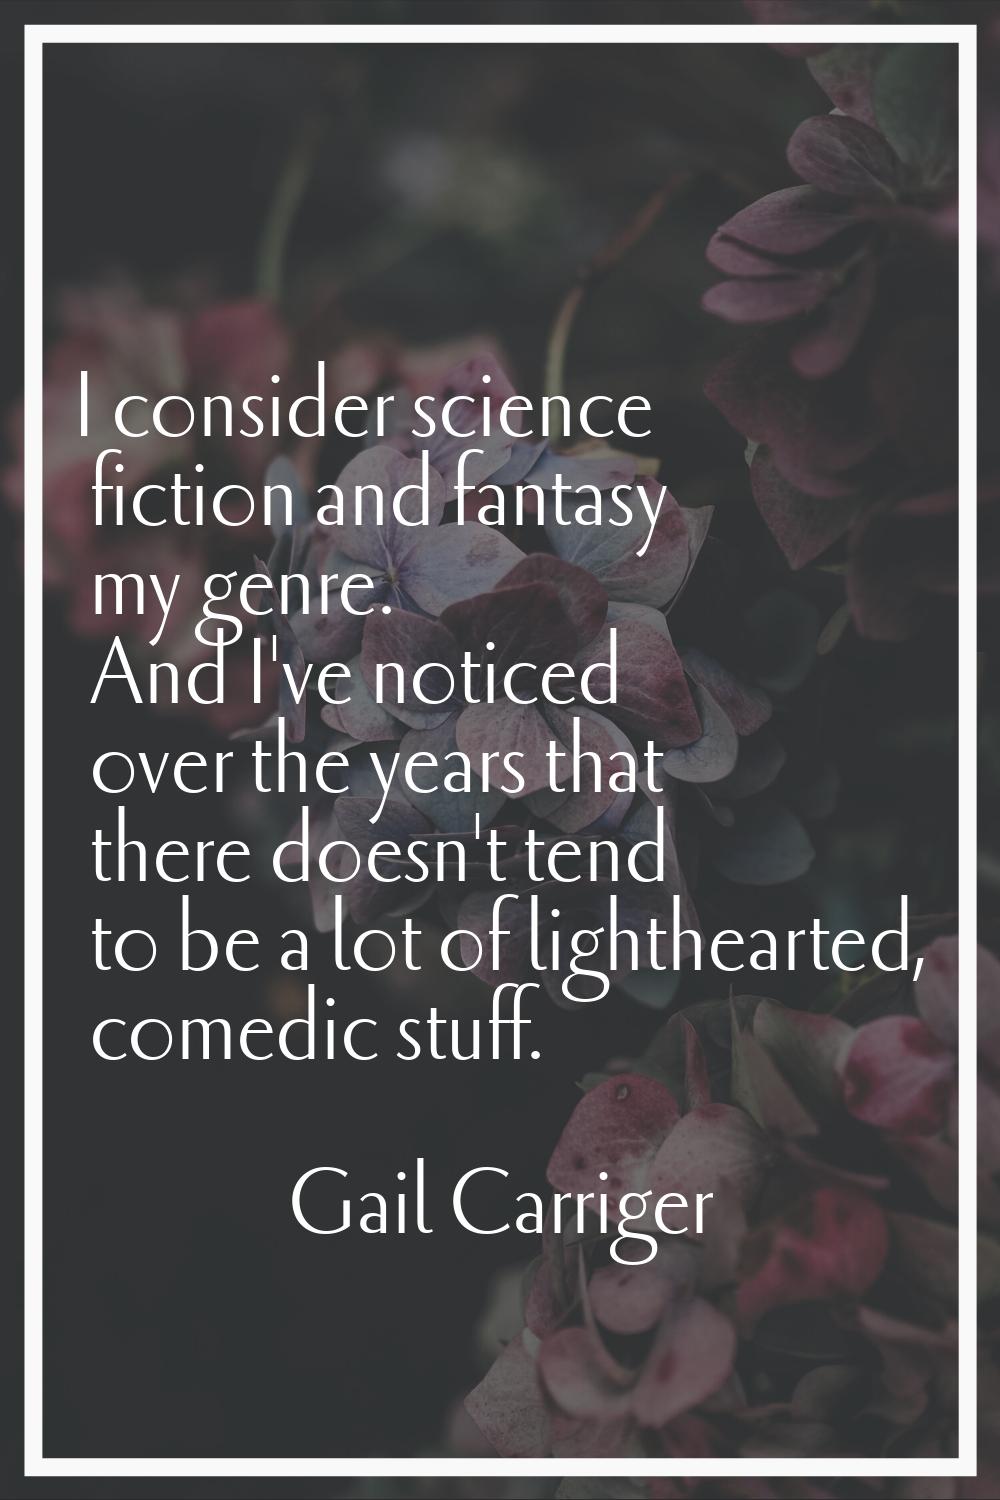 I consider science fiction and fantasy my genre. And I've noticed over the years that there doesn't